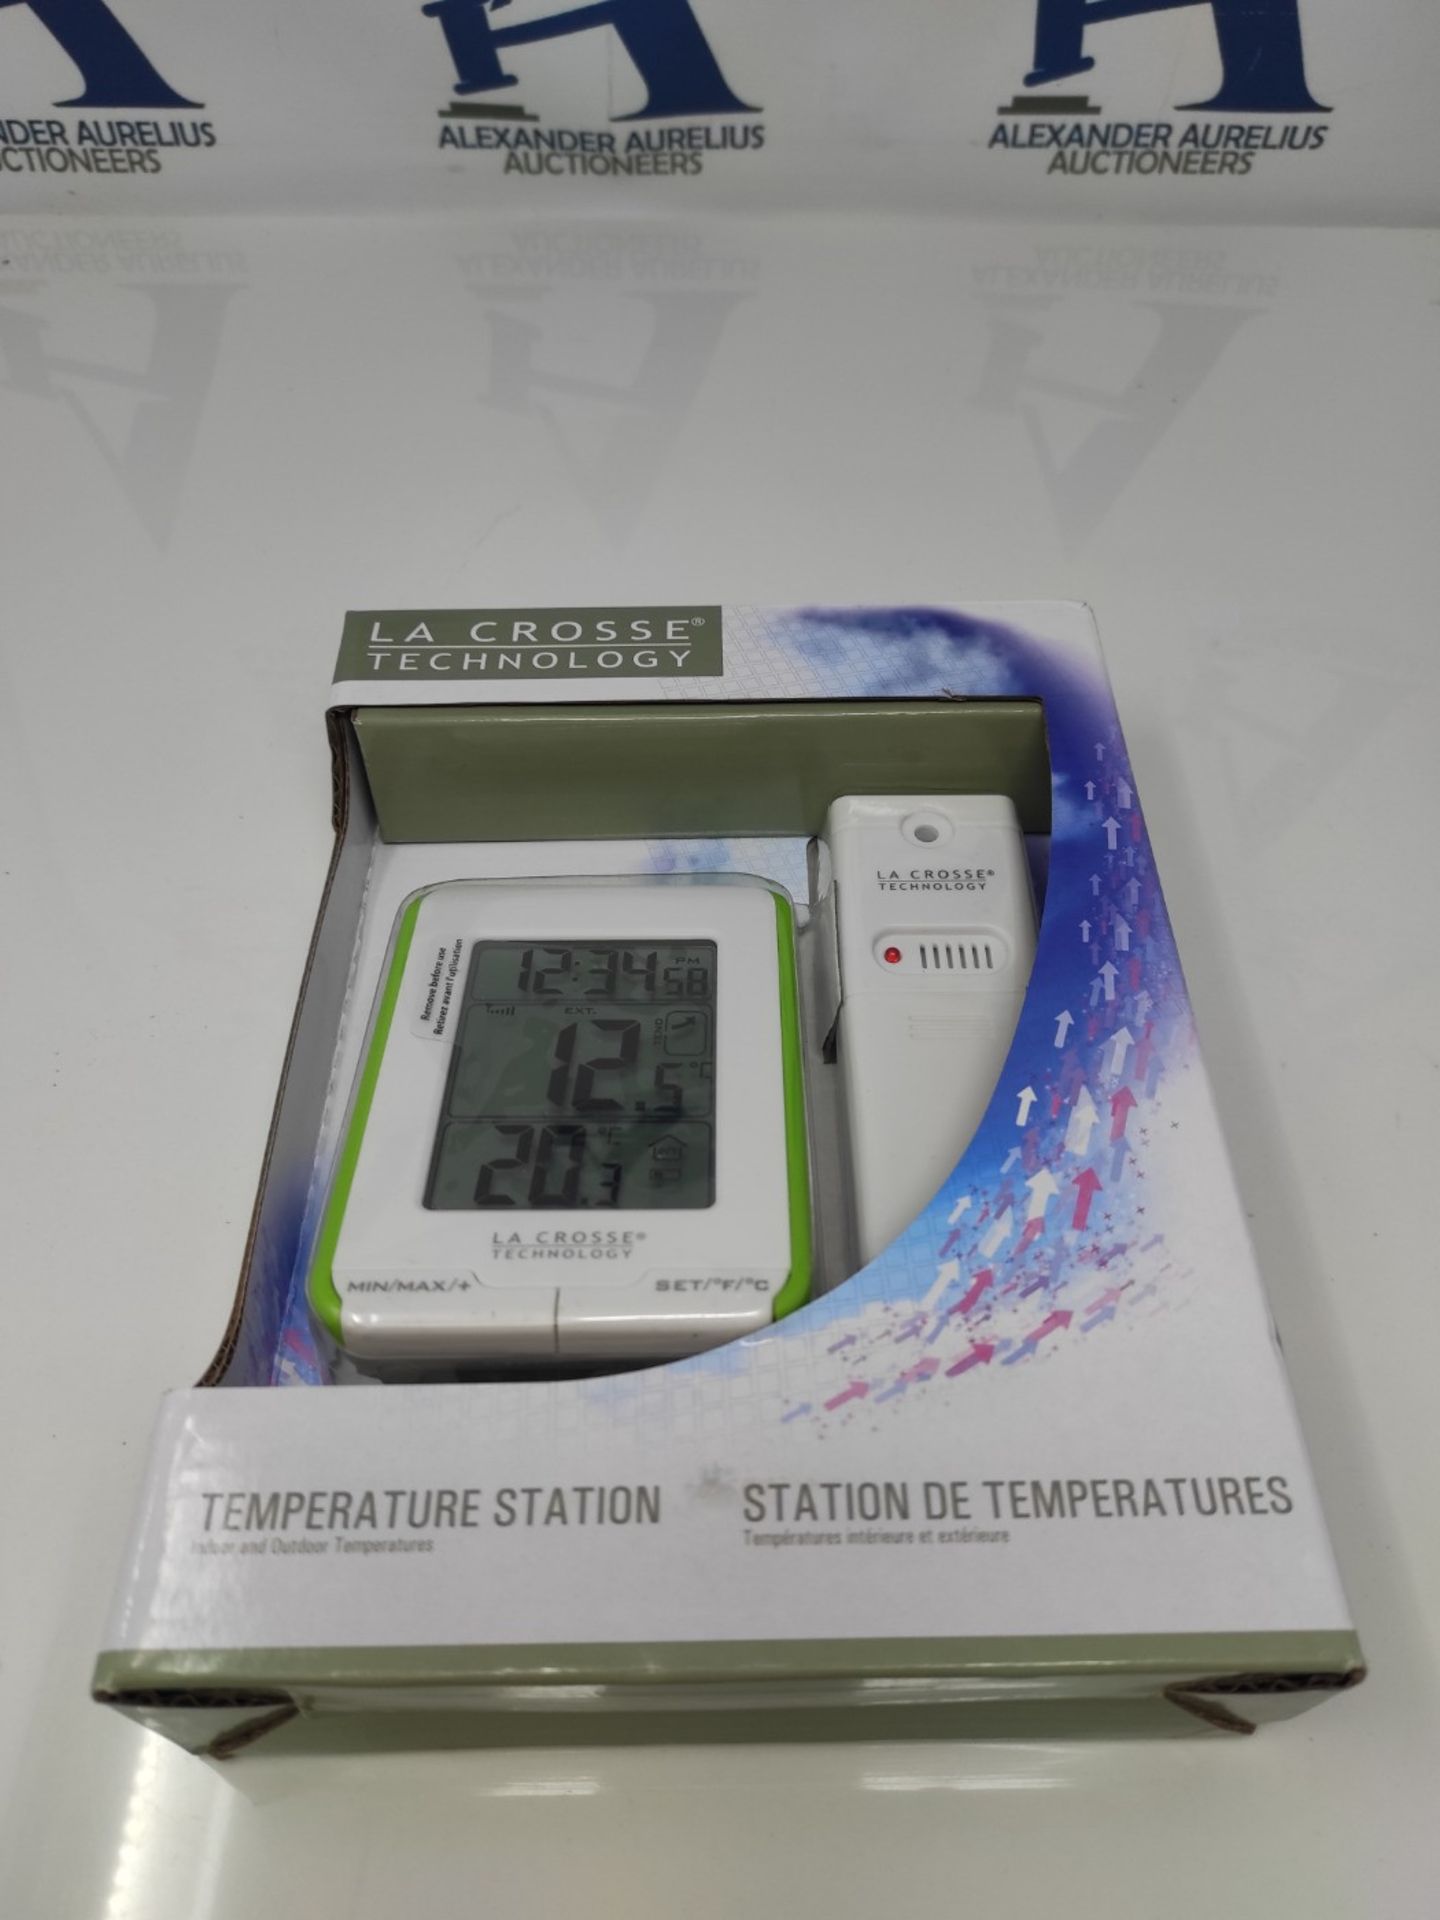 [NEW] La Crosse Technology WS6810 Temperature Station, Green Color - Image 2 of 2